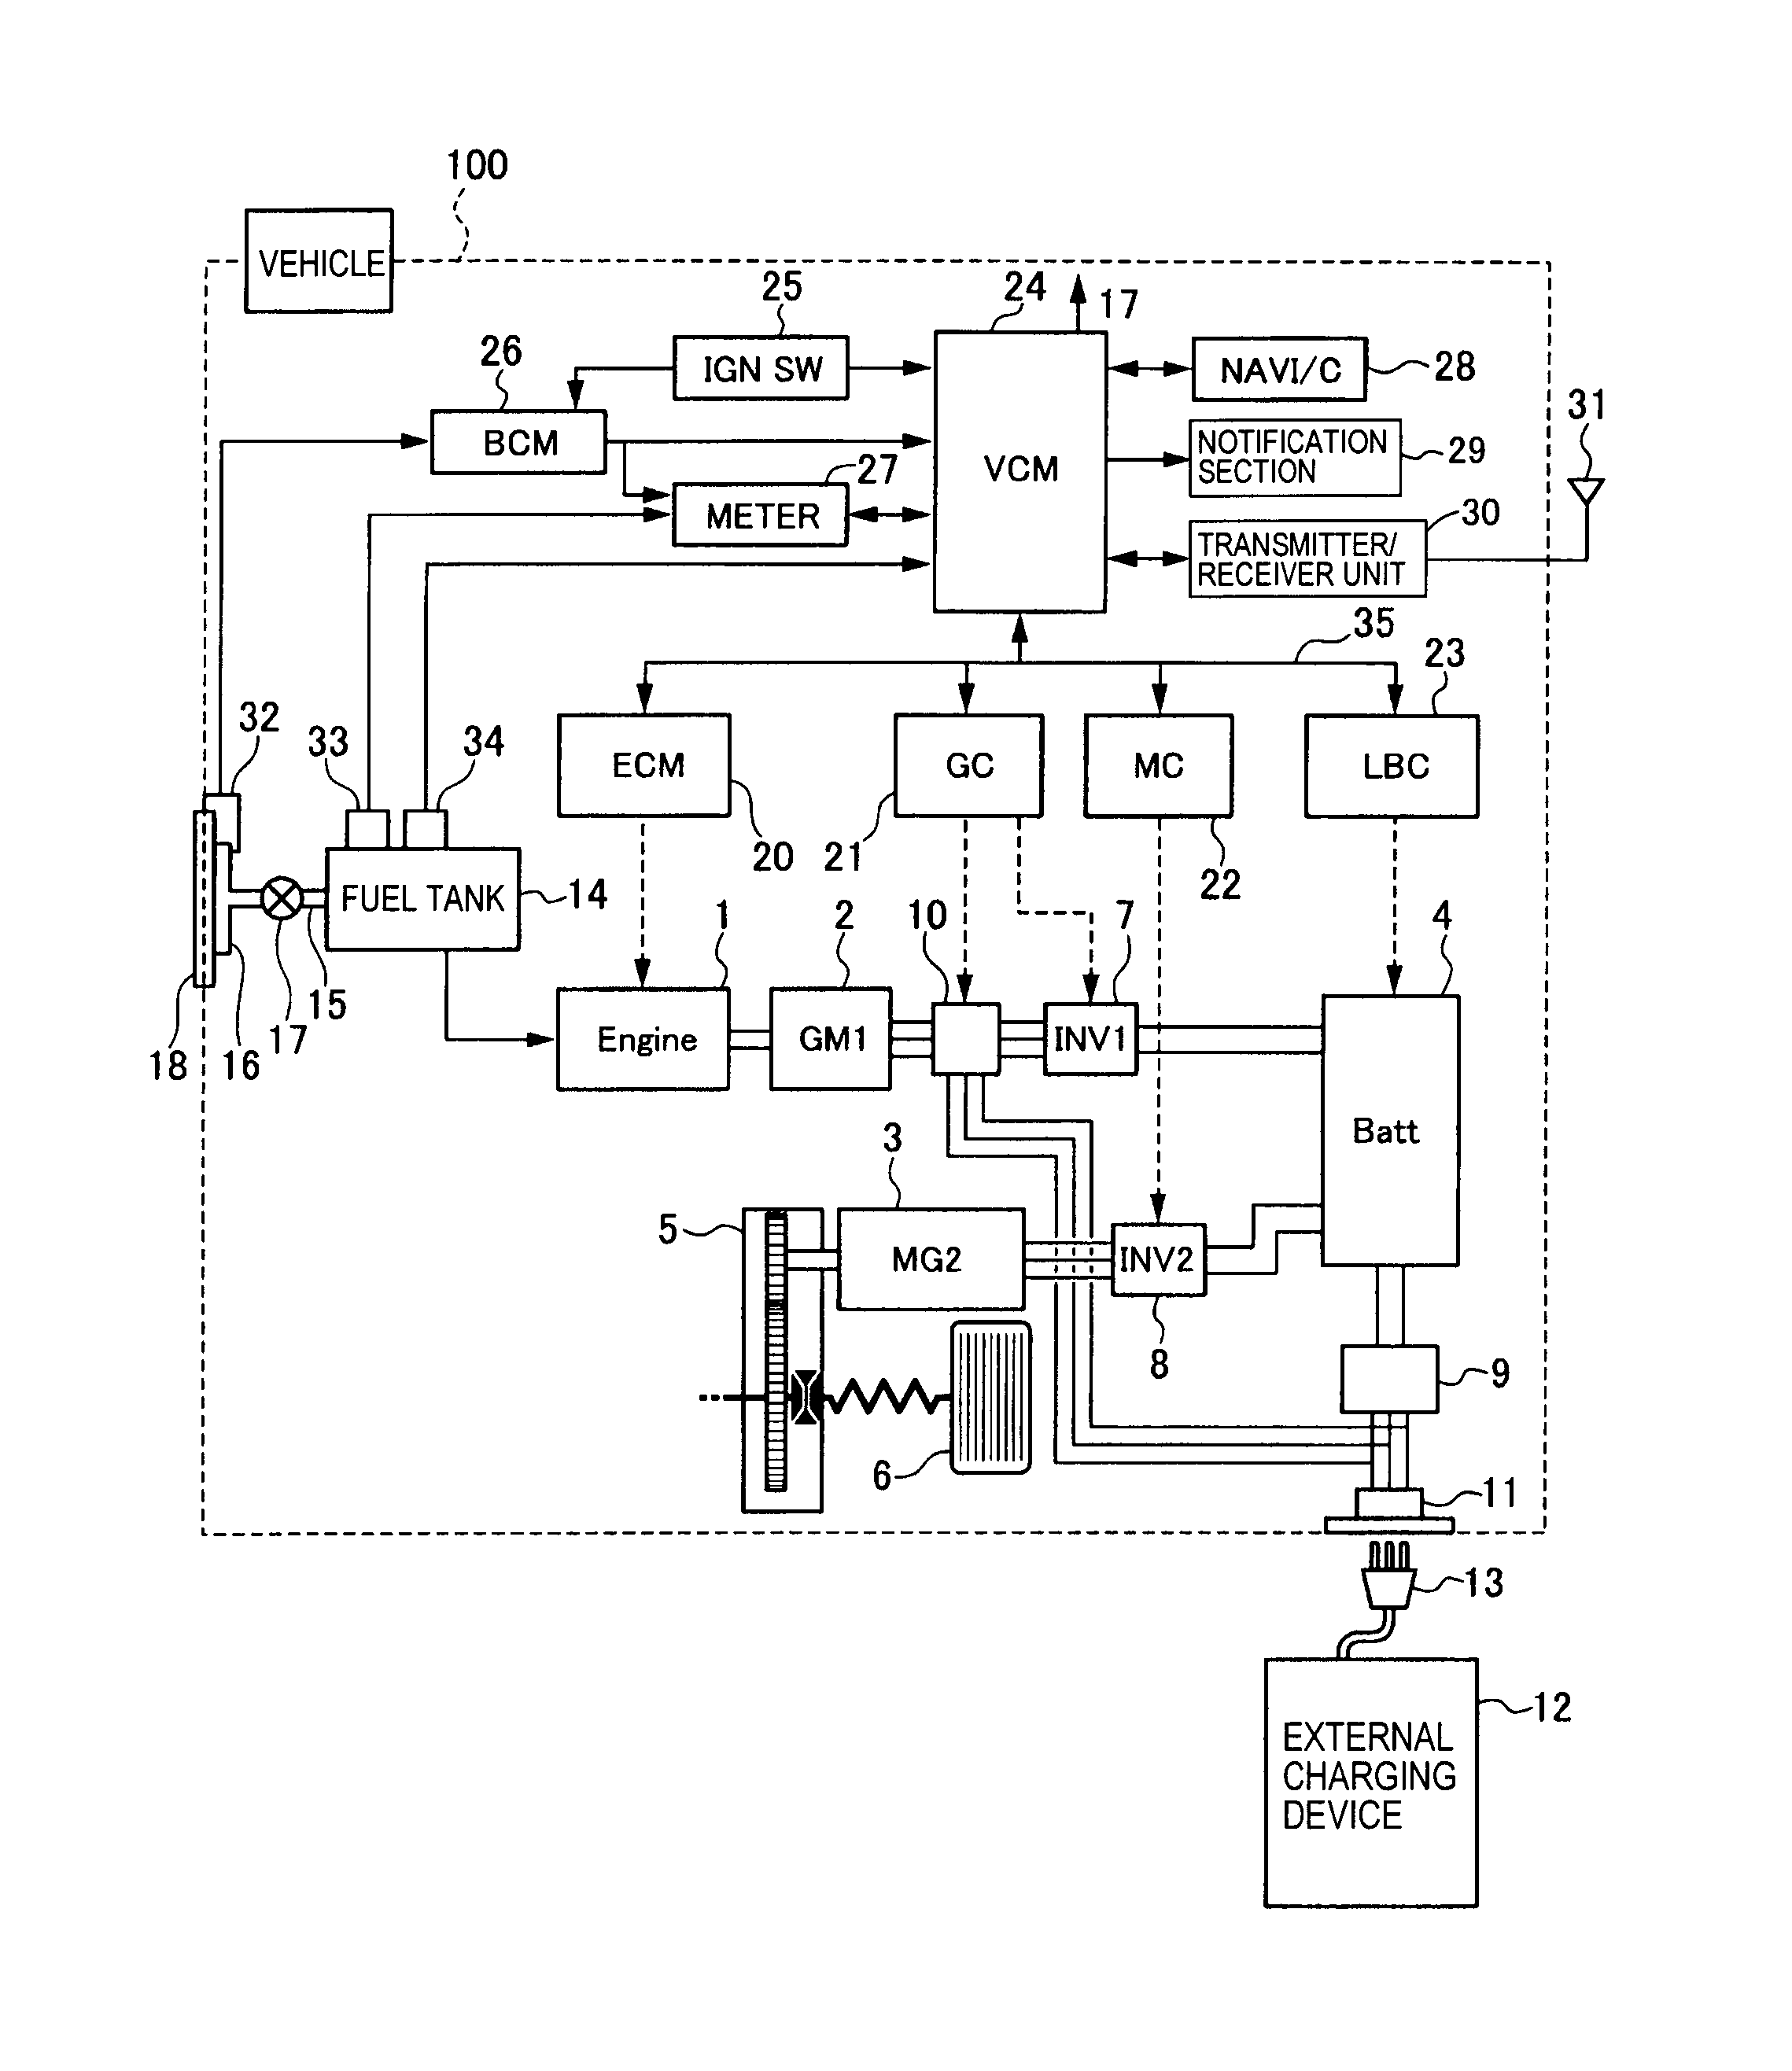 wiring diagram 230v single phase air conditioner with 2 stages of electric heat